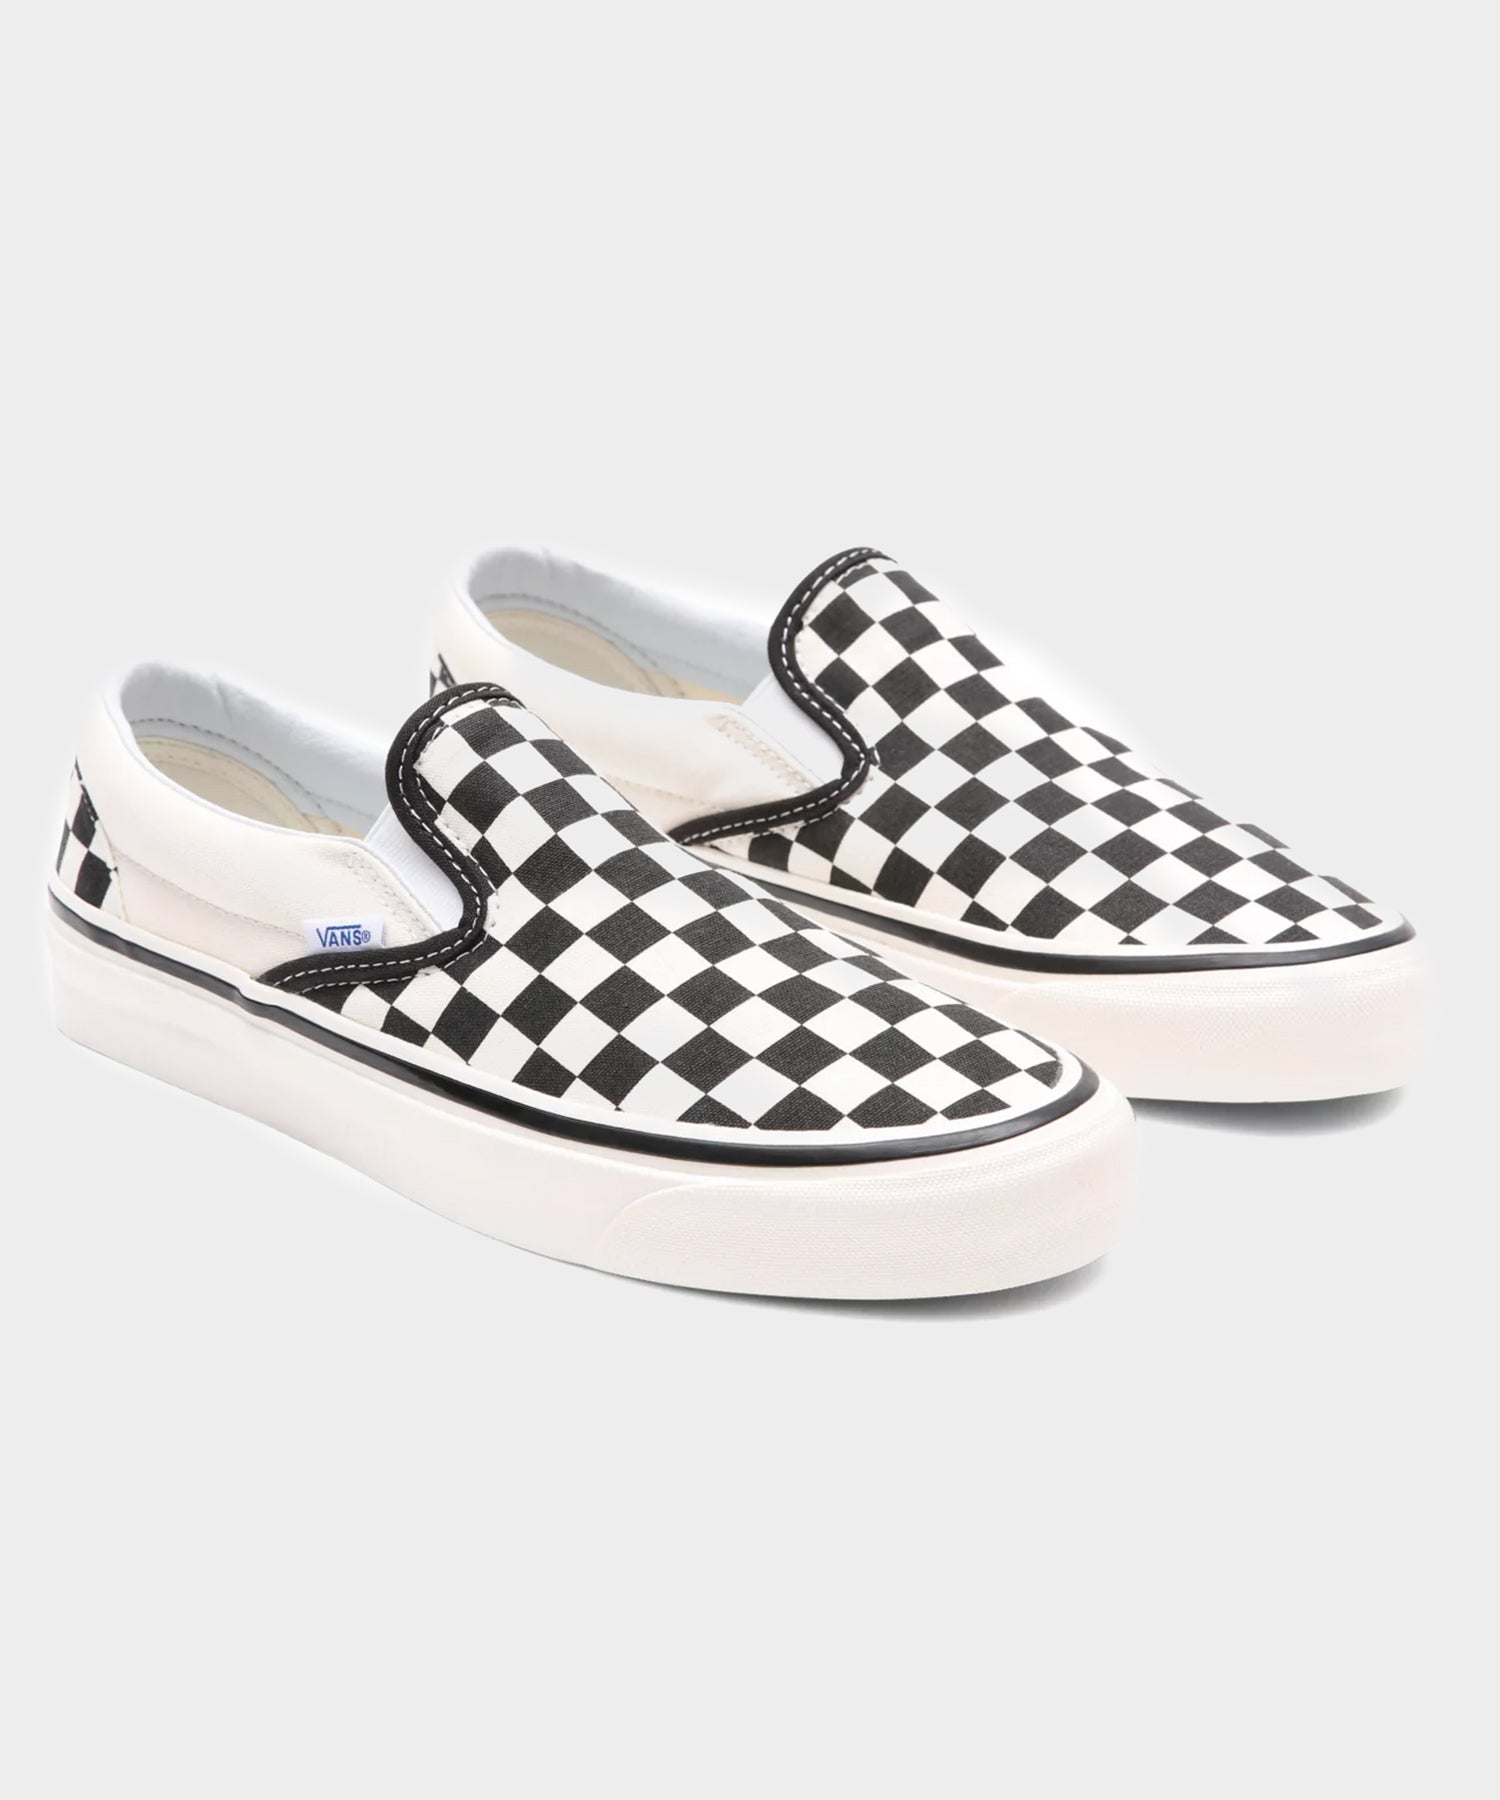 Vans Checkerboard Classic Slip-On Shoes